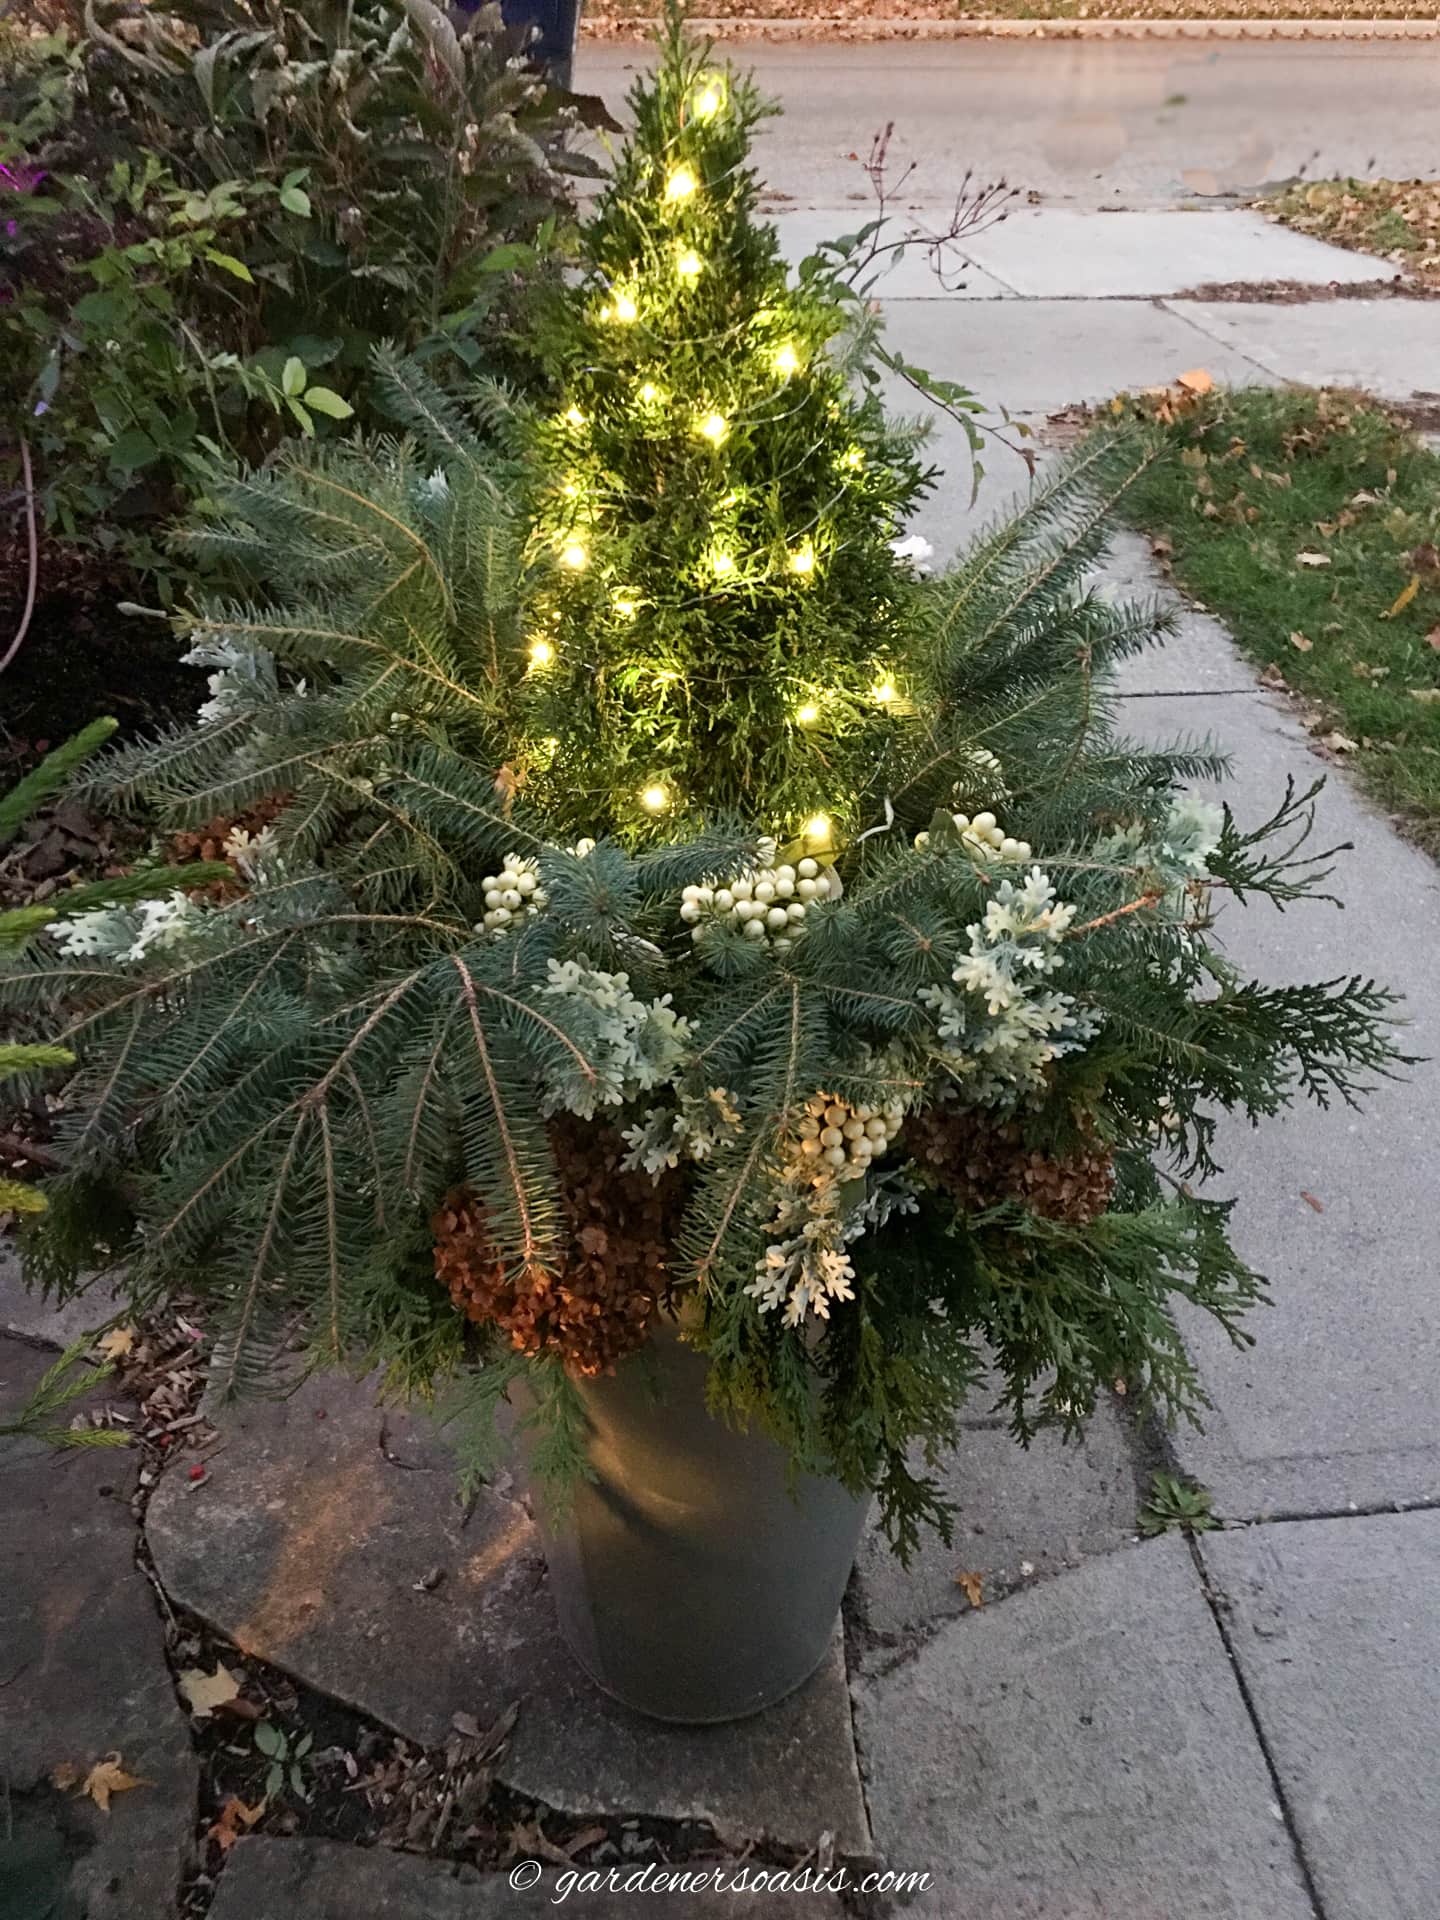 A DIY winter container with evergreens, faux picks, dried flowers and white lights